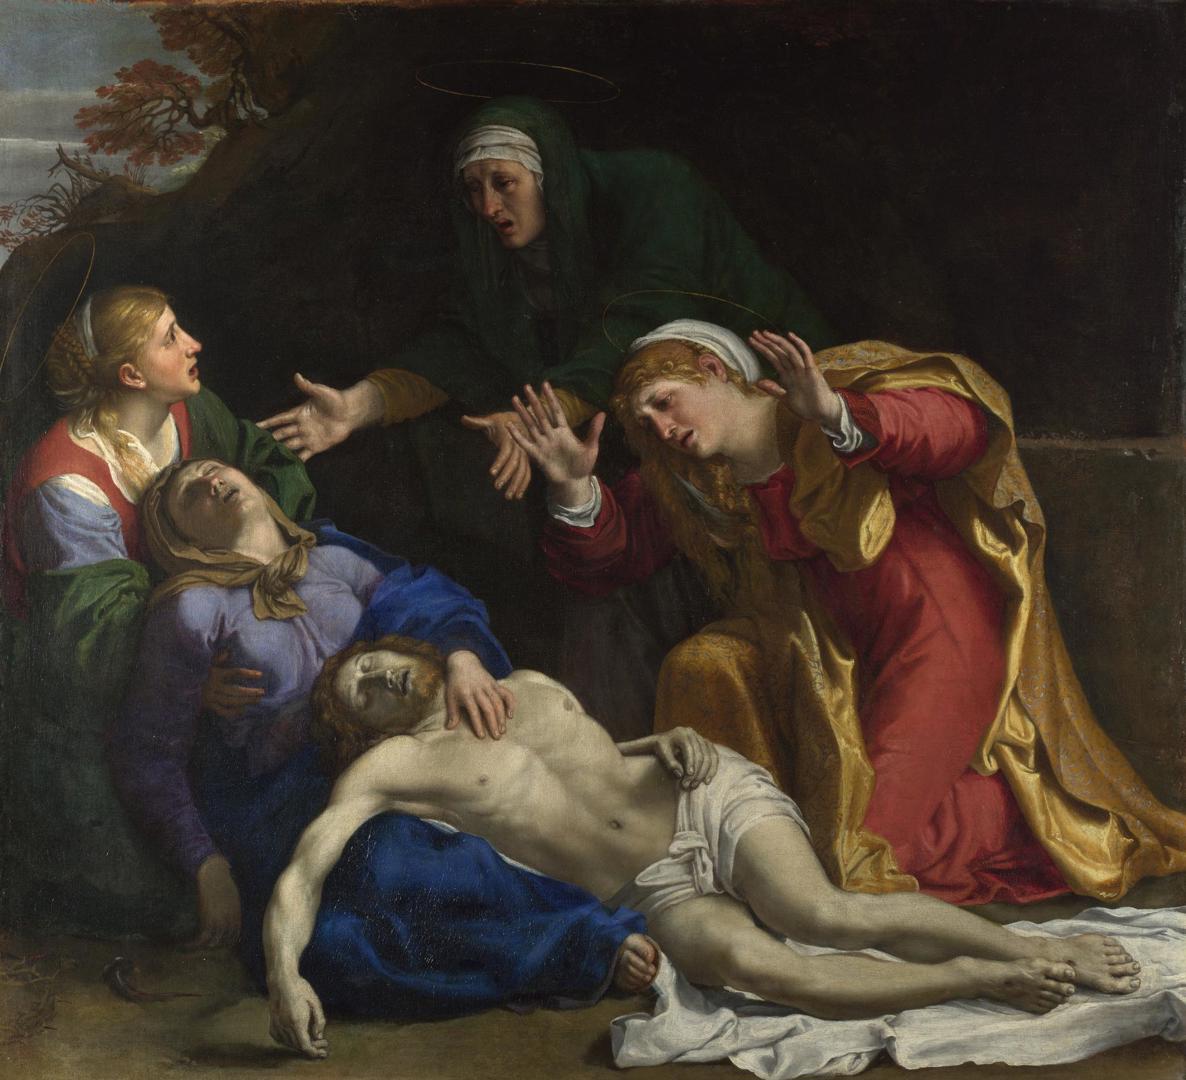 The Dead Christ Mourned ('The Three Maries') by Annibale Carracci